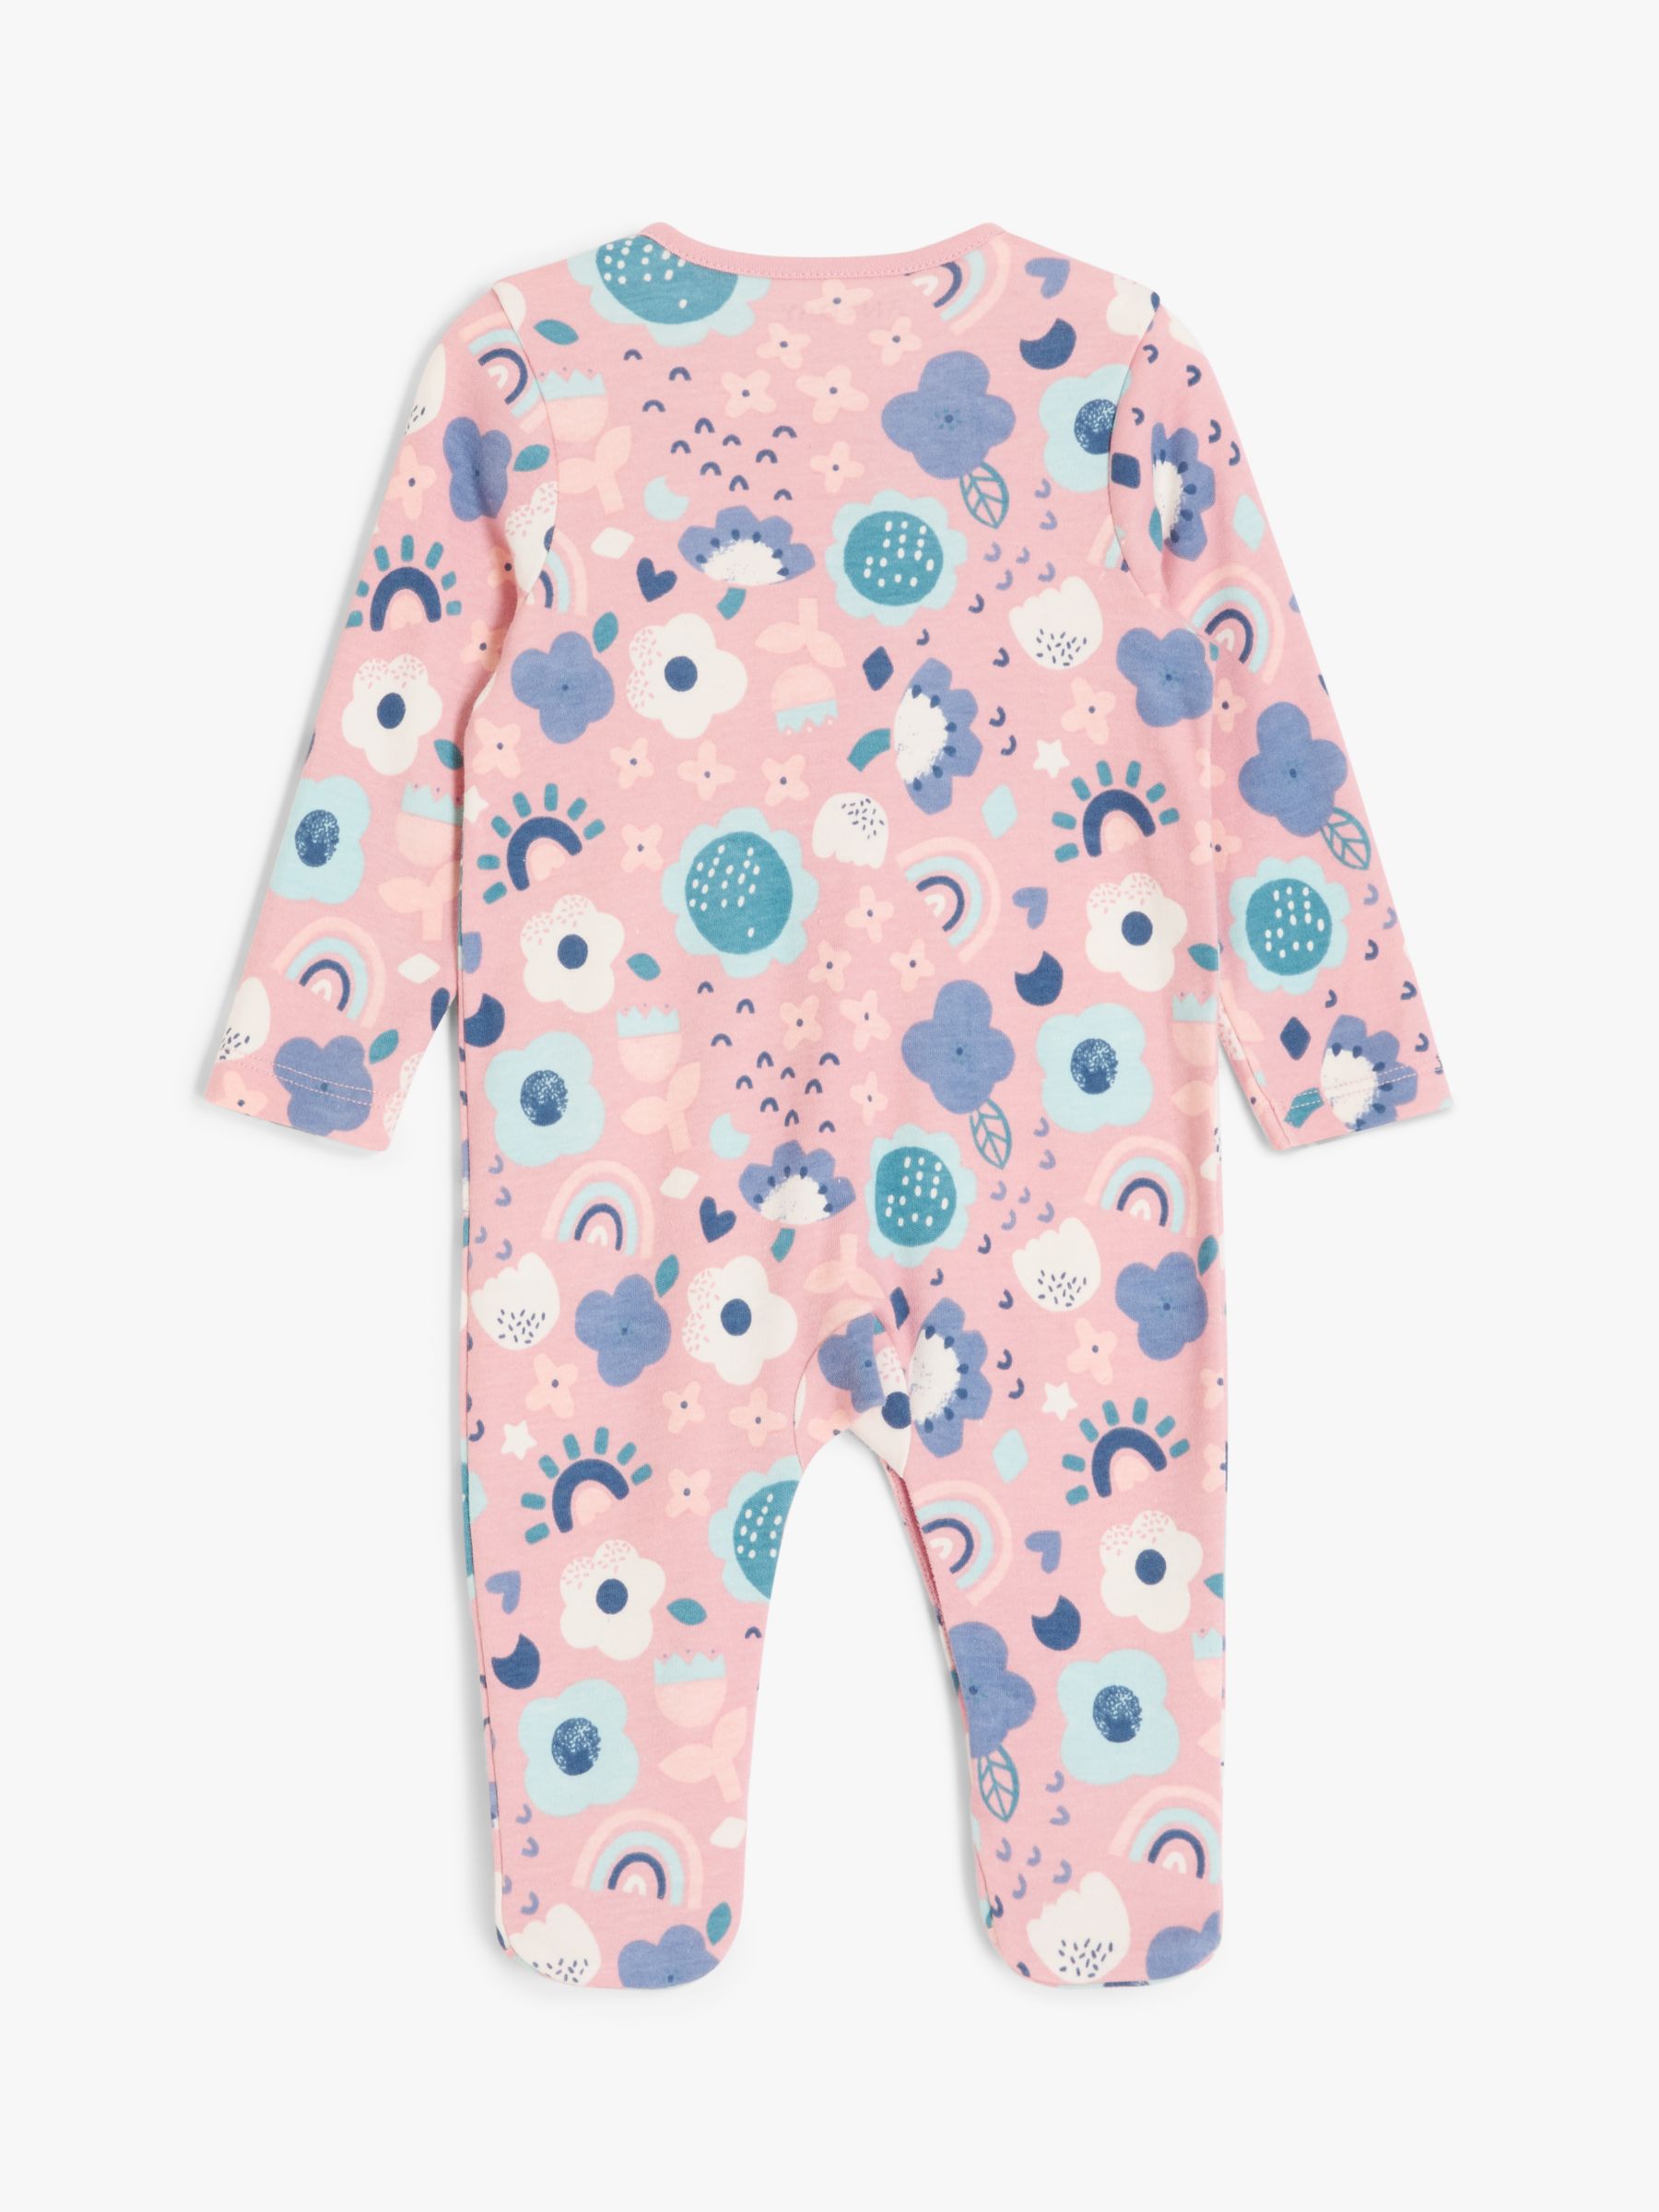 ANYDAY John Lewis & Partners Baby Flowers Sleepsuit, Pink